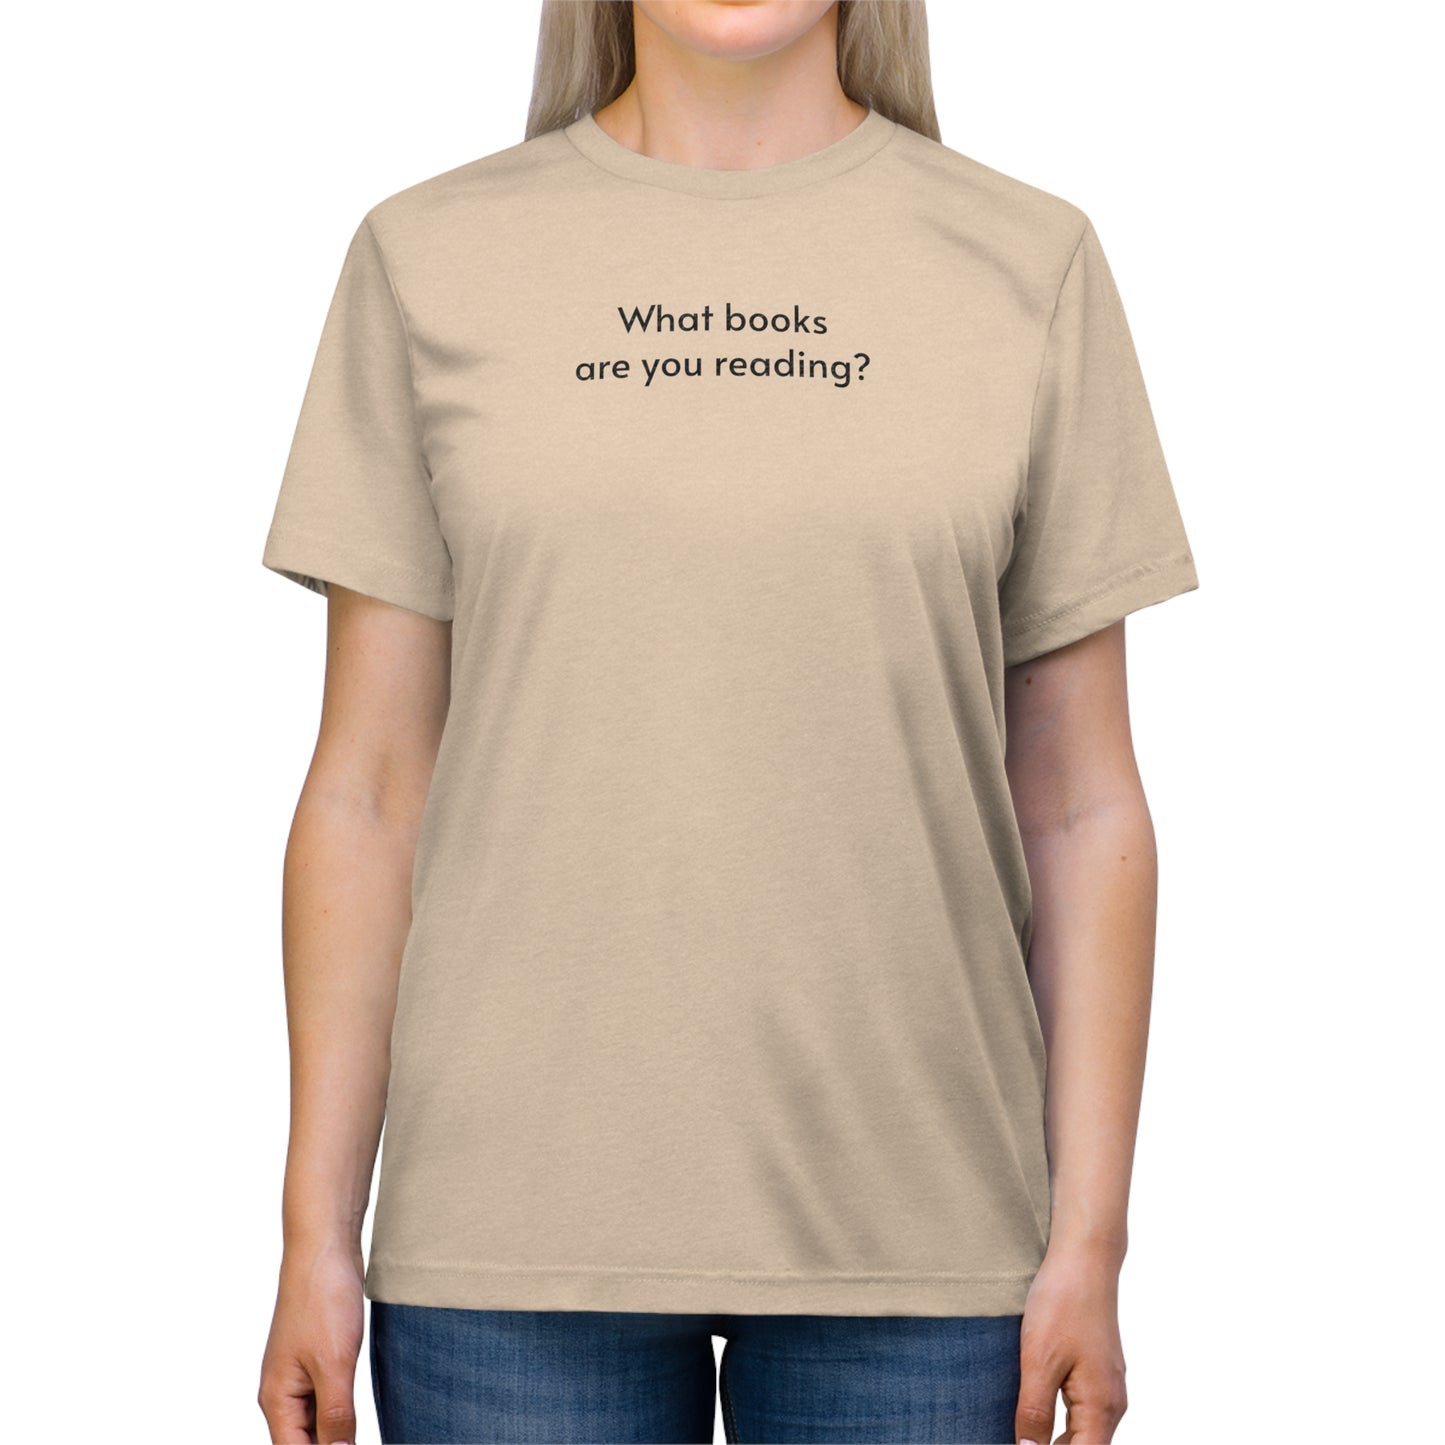 A Triblend Tee: What books are you reading?